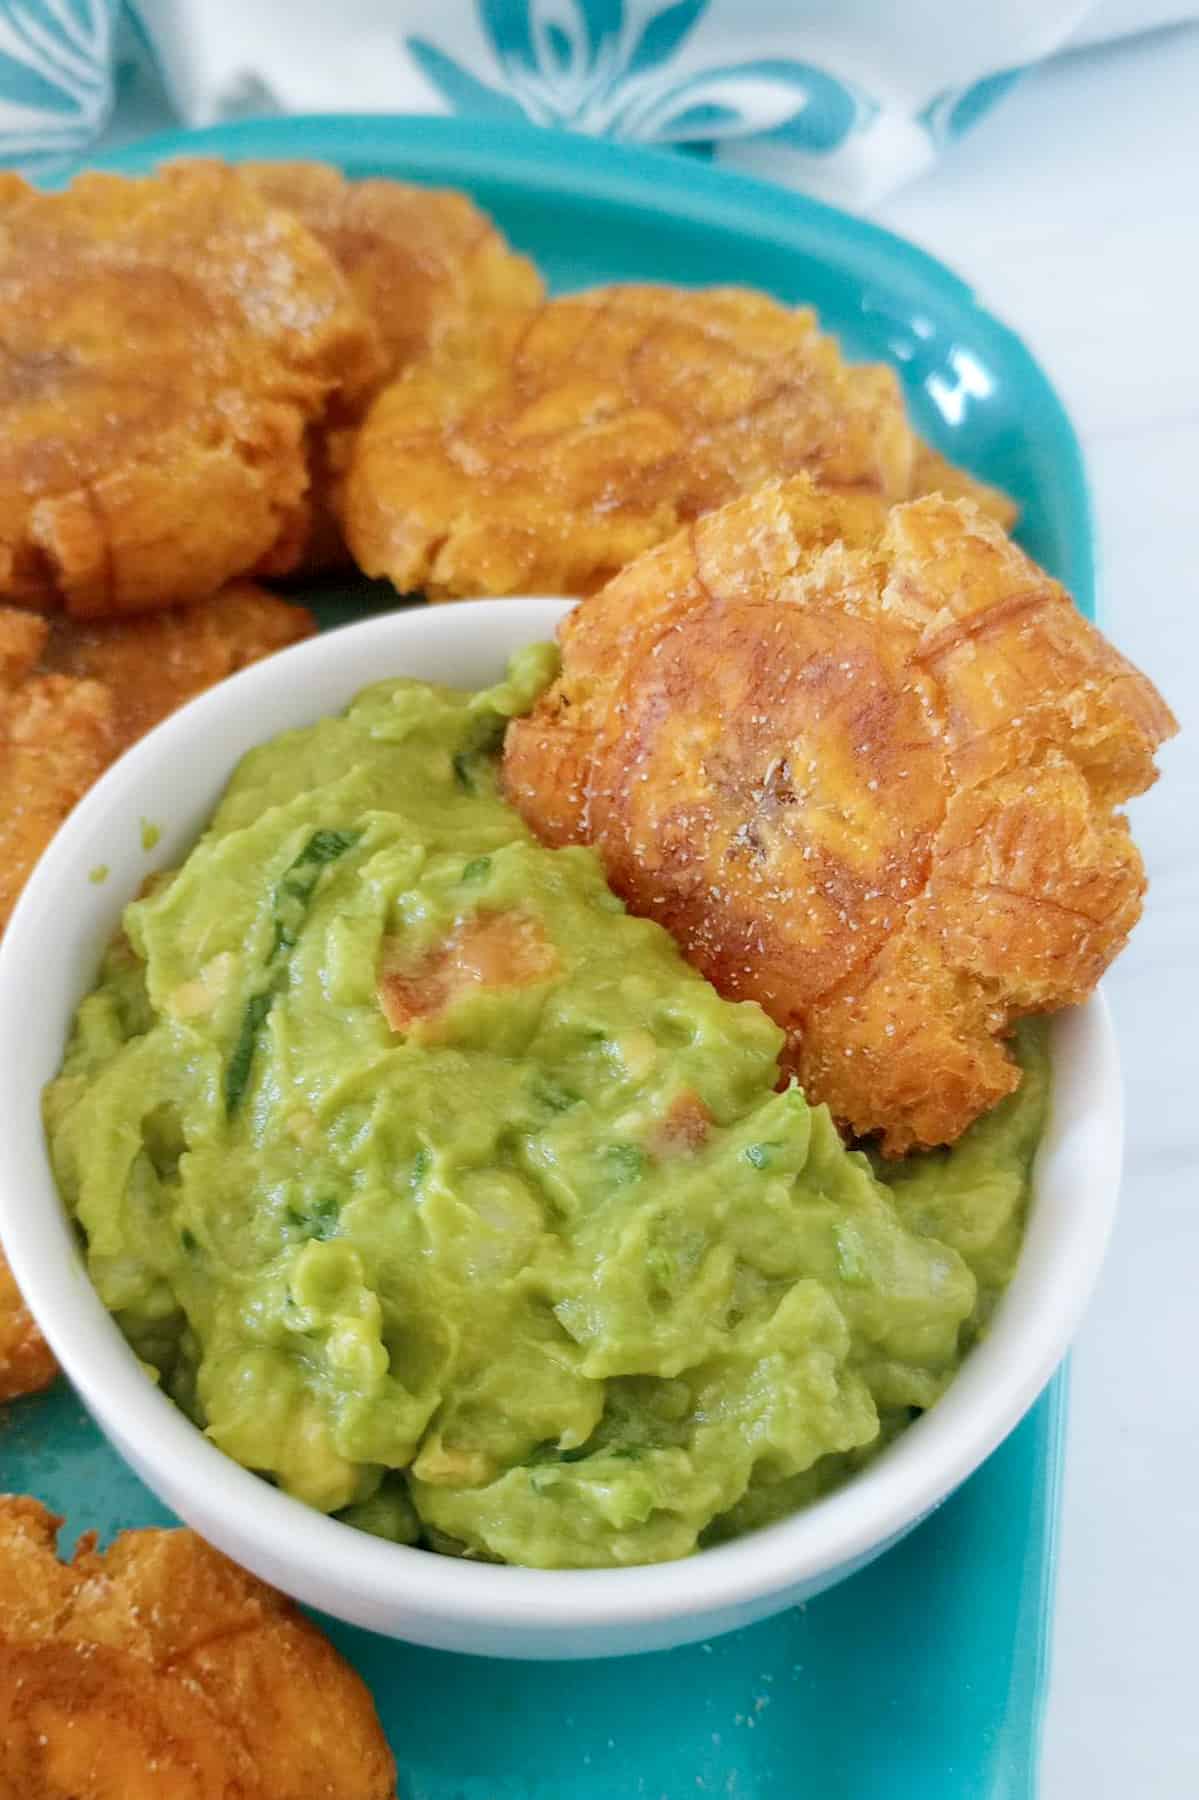 Fried green plantain being dipped in a bowl of guacamole that's sitting on a platter full of tostones.